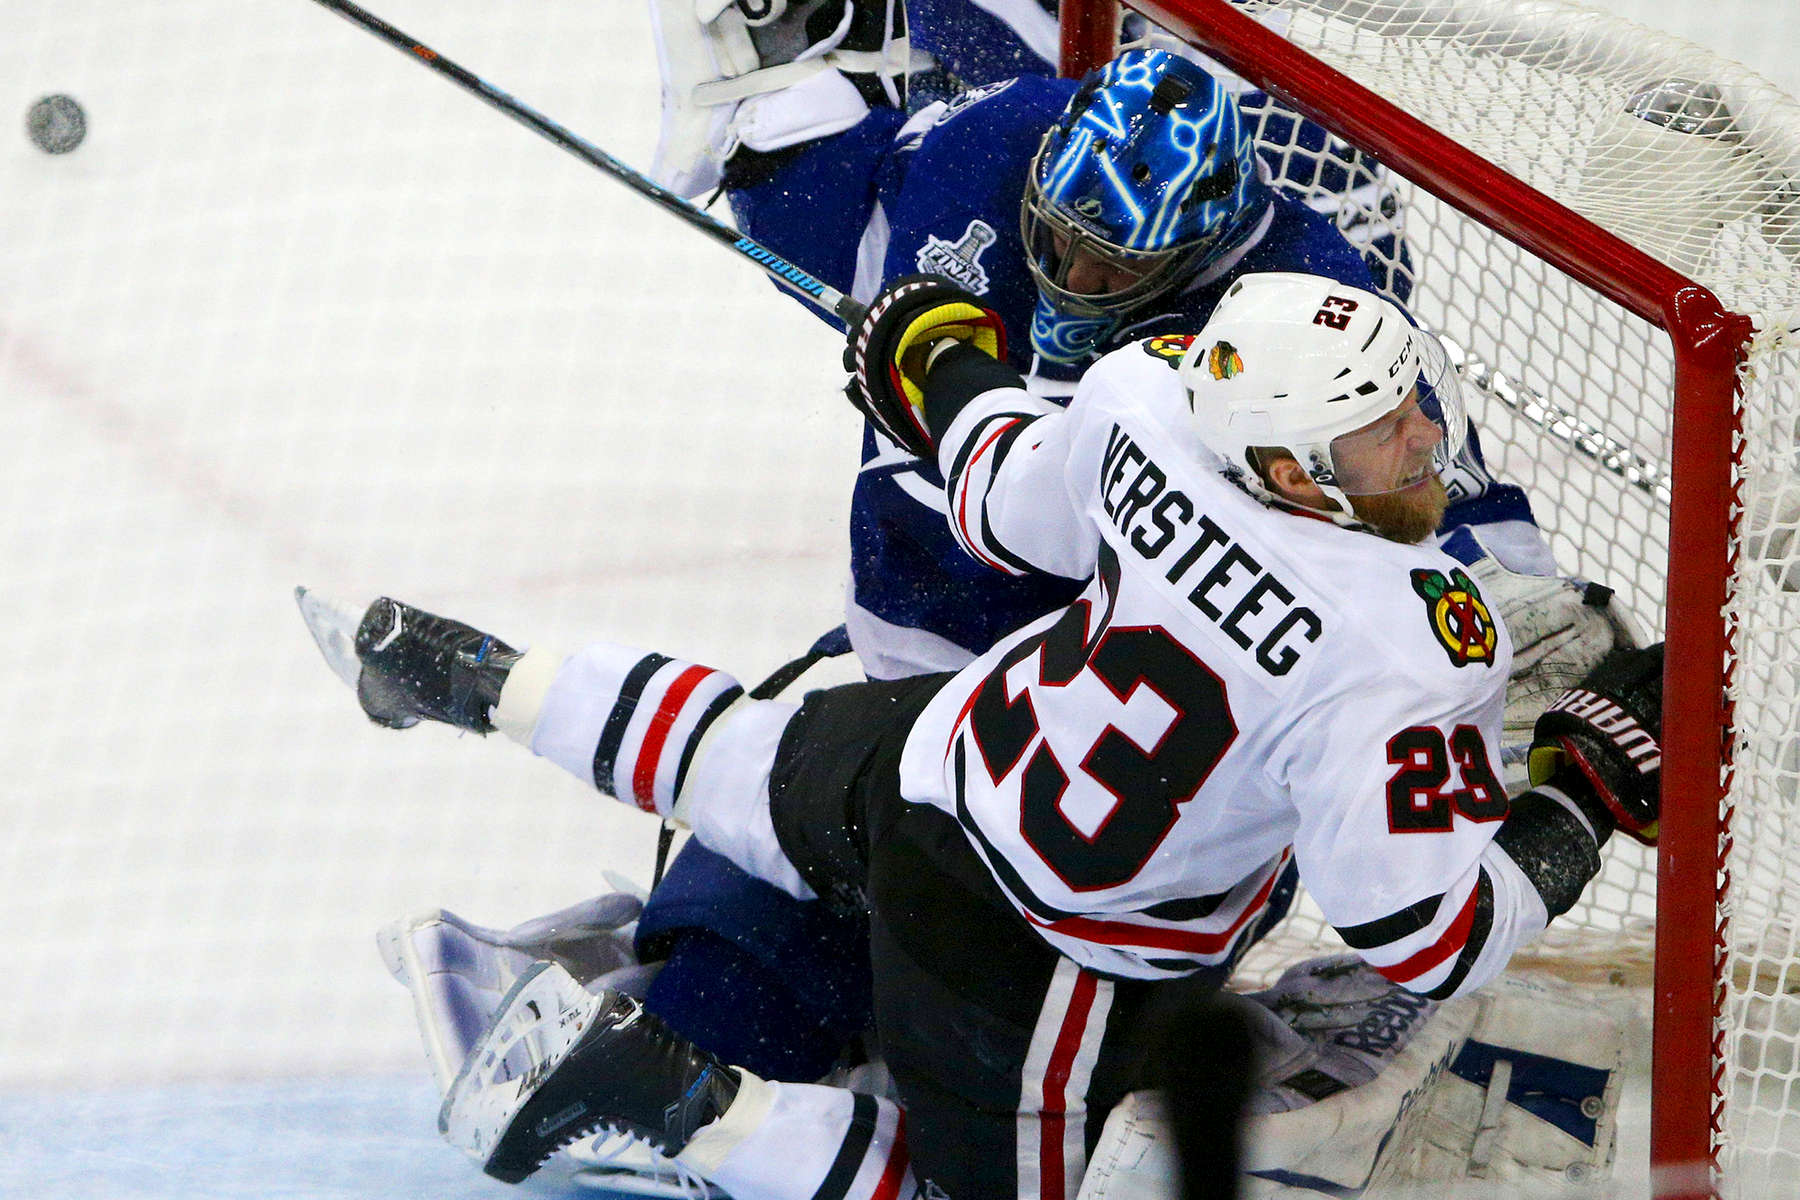 Chicago Blackhawks right wing Kris Versteeg collided with Tampa Bay Lightning goaltender Ben Bishop and the post after getting tripped up during the second period in Game 1 of the Stanley Cup Final at Amalie Arena in Tampa, Fla. 